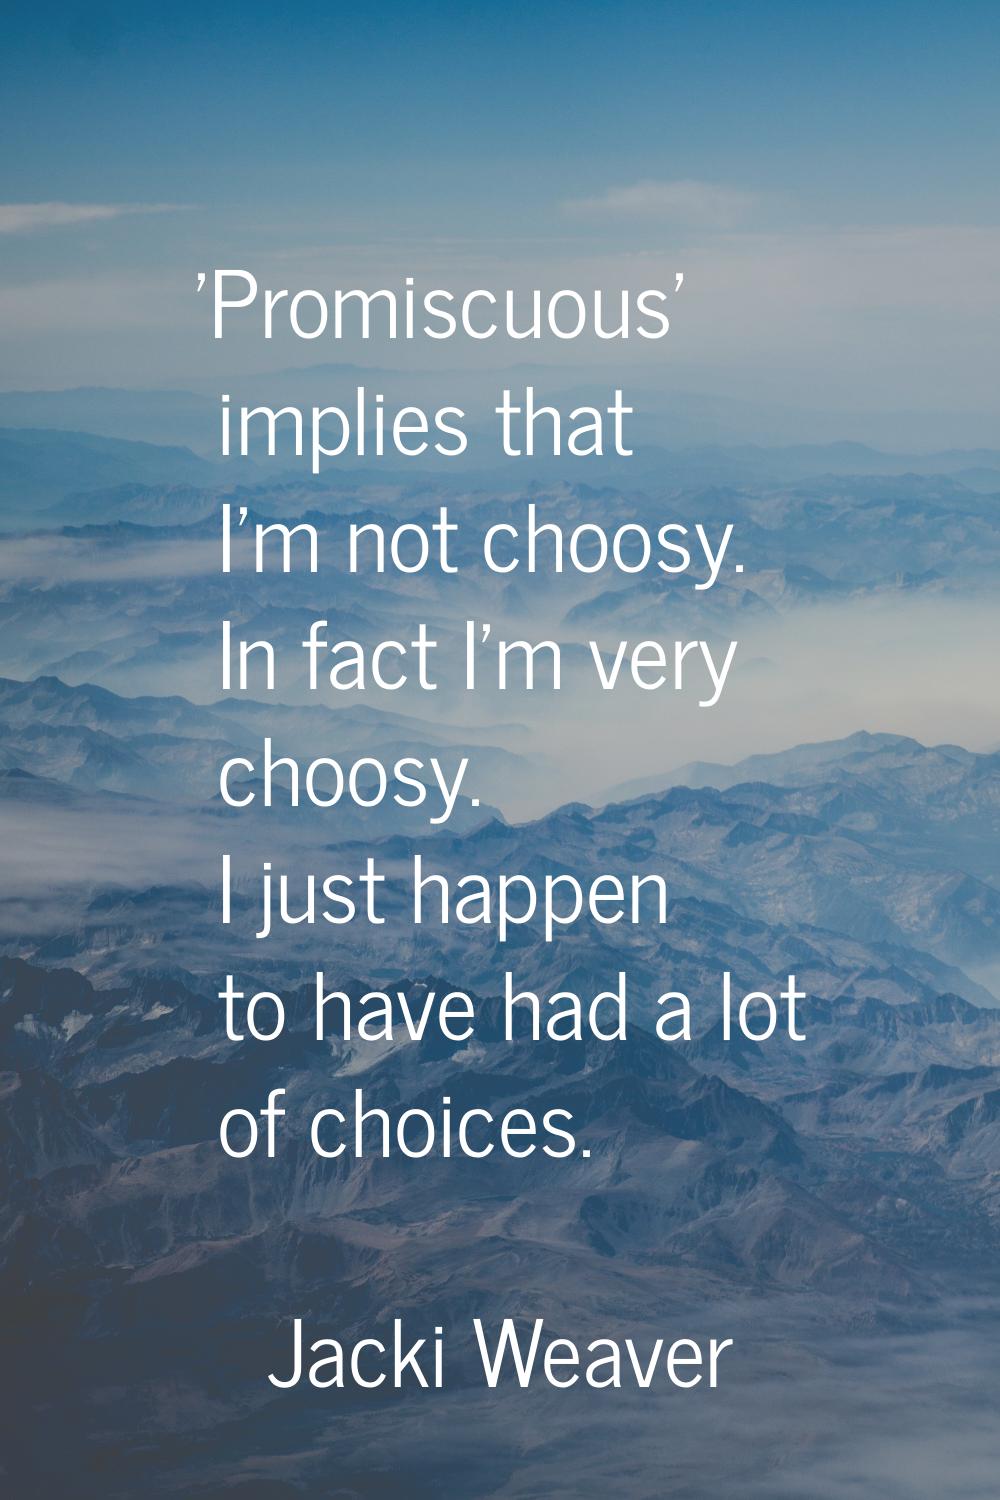 'Promiscuous' implies that I'm not choosy. In fact I'm very choosy. I just happen to have had a lot